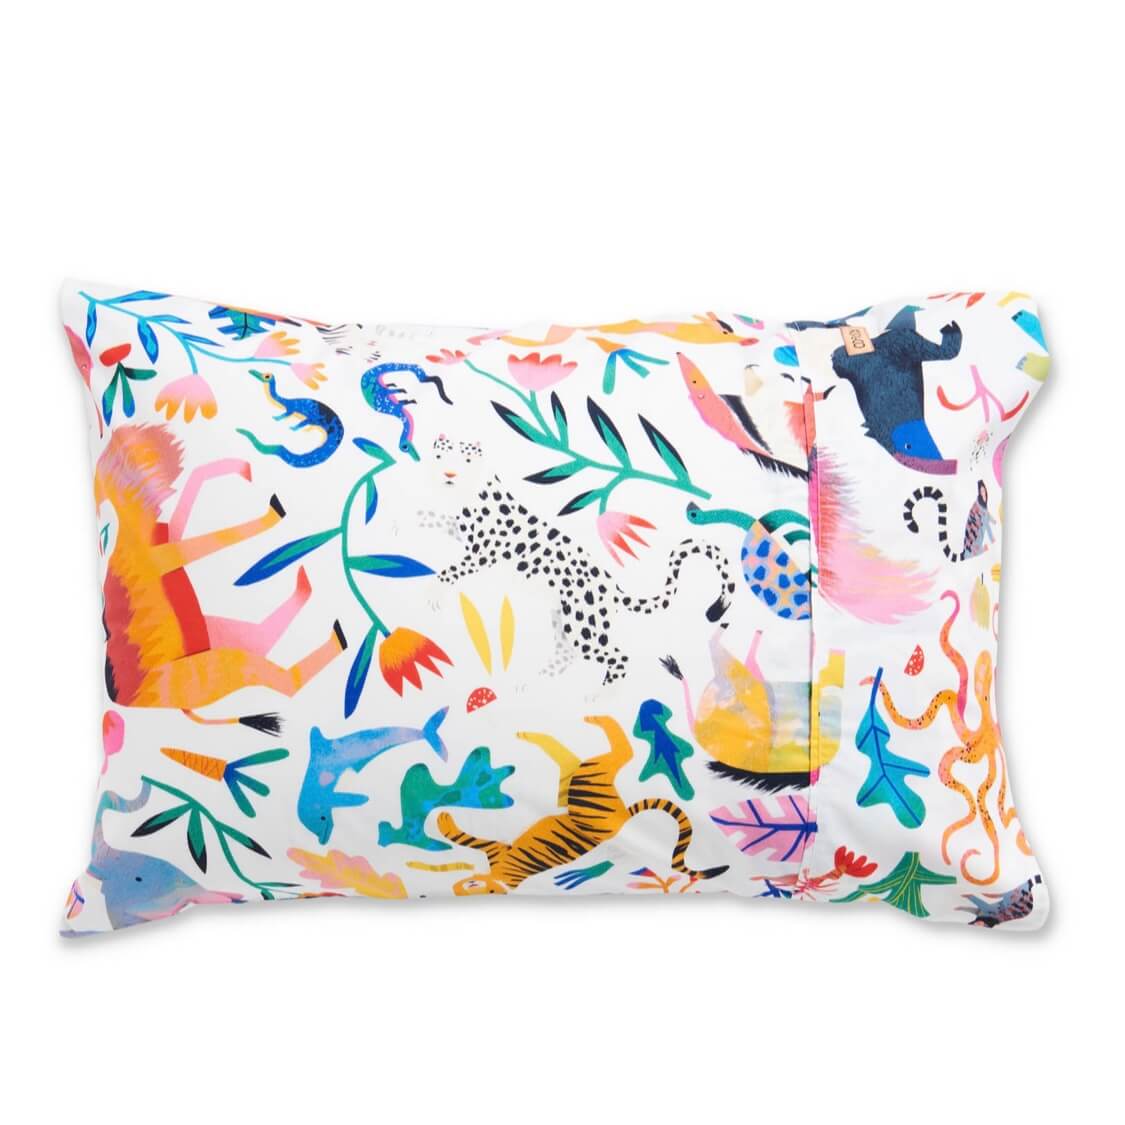     kip and co |fitted sheet cool animals |the home maven